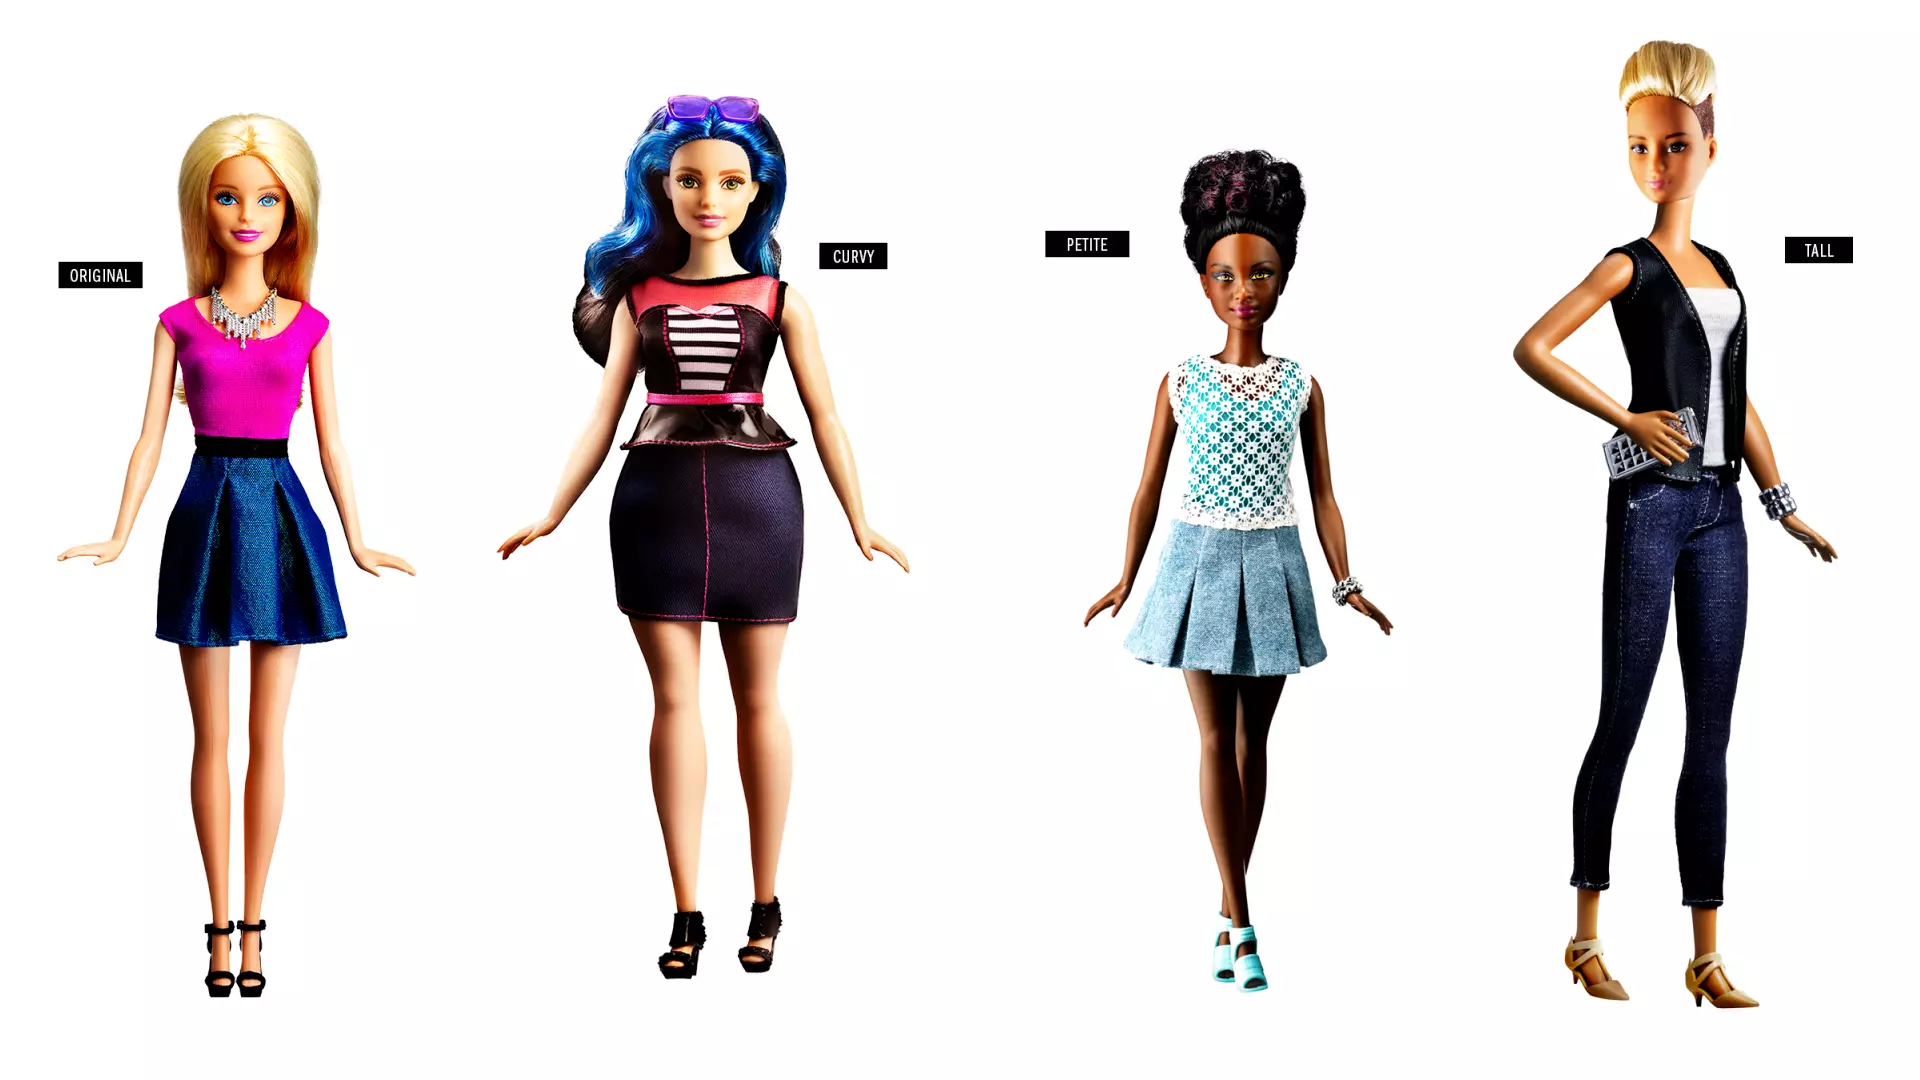 Toying with Diversity: Mattel Brings Body Options to Barbie